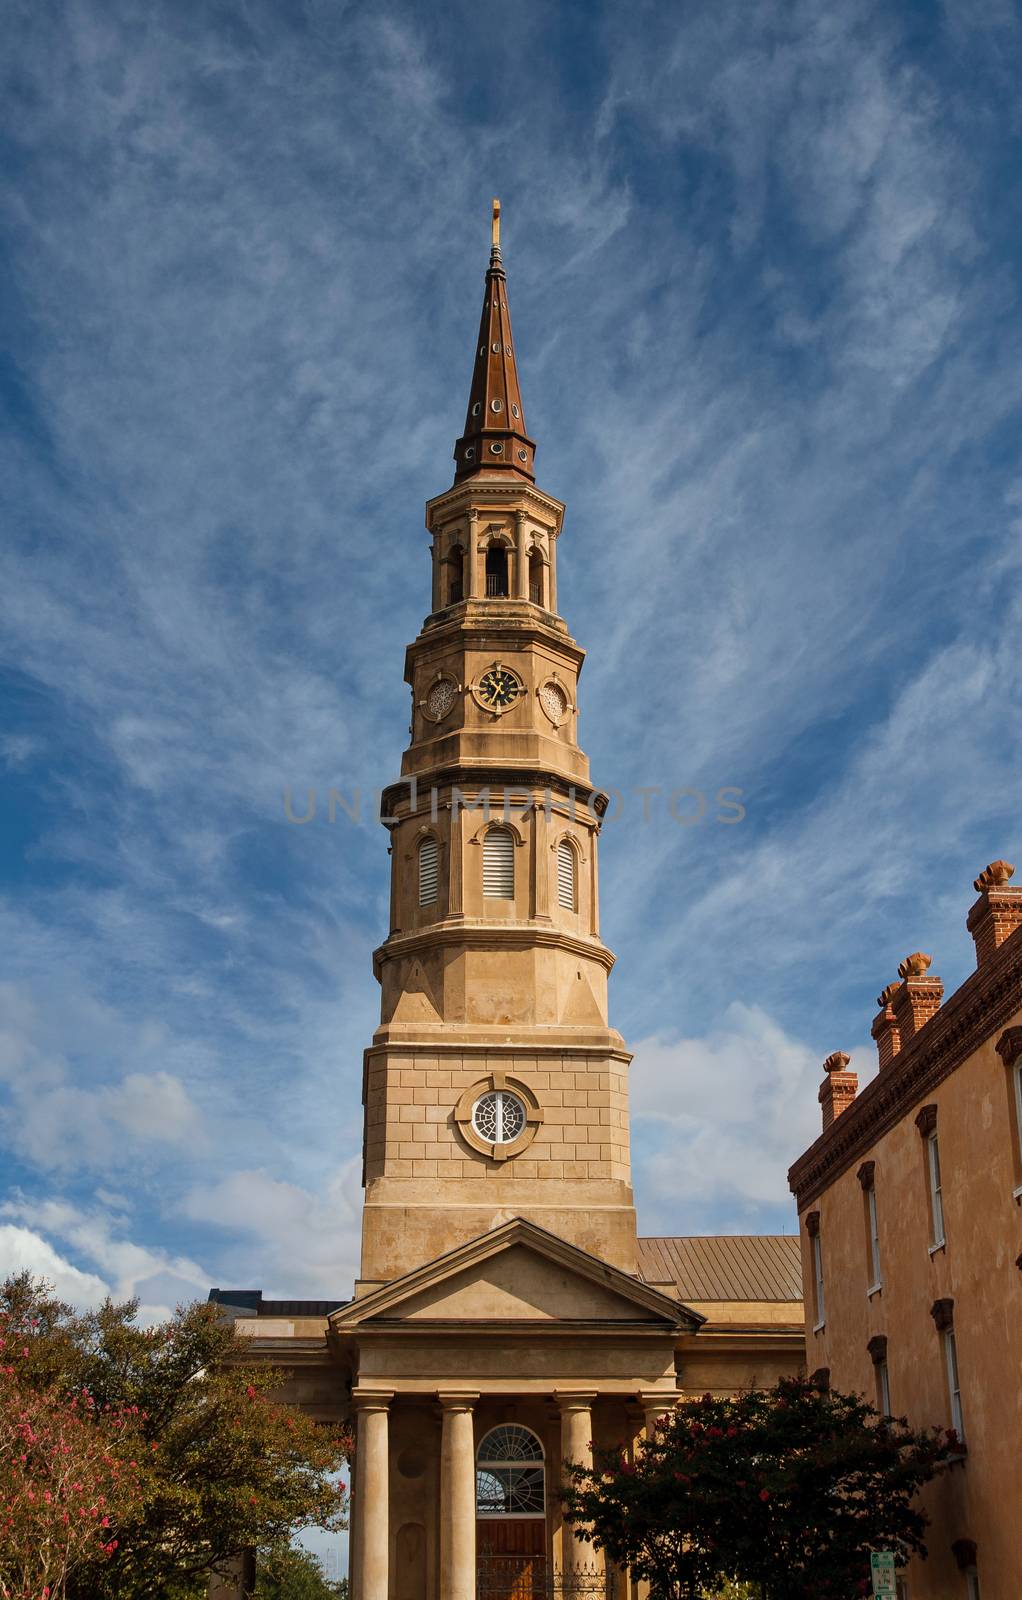 An old brown stone church steeple with clock in Charleston, South Carolina